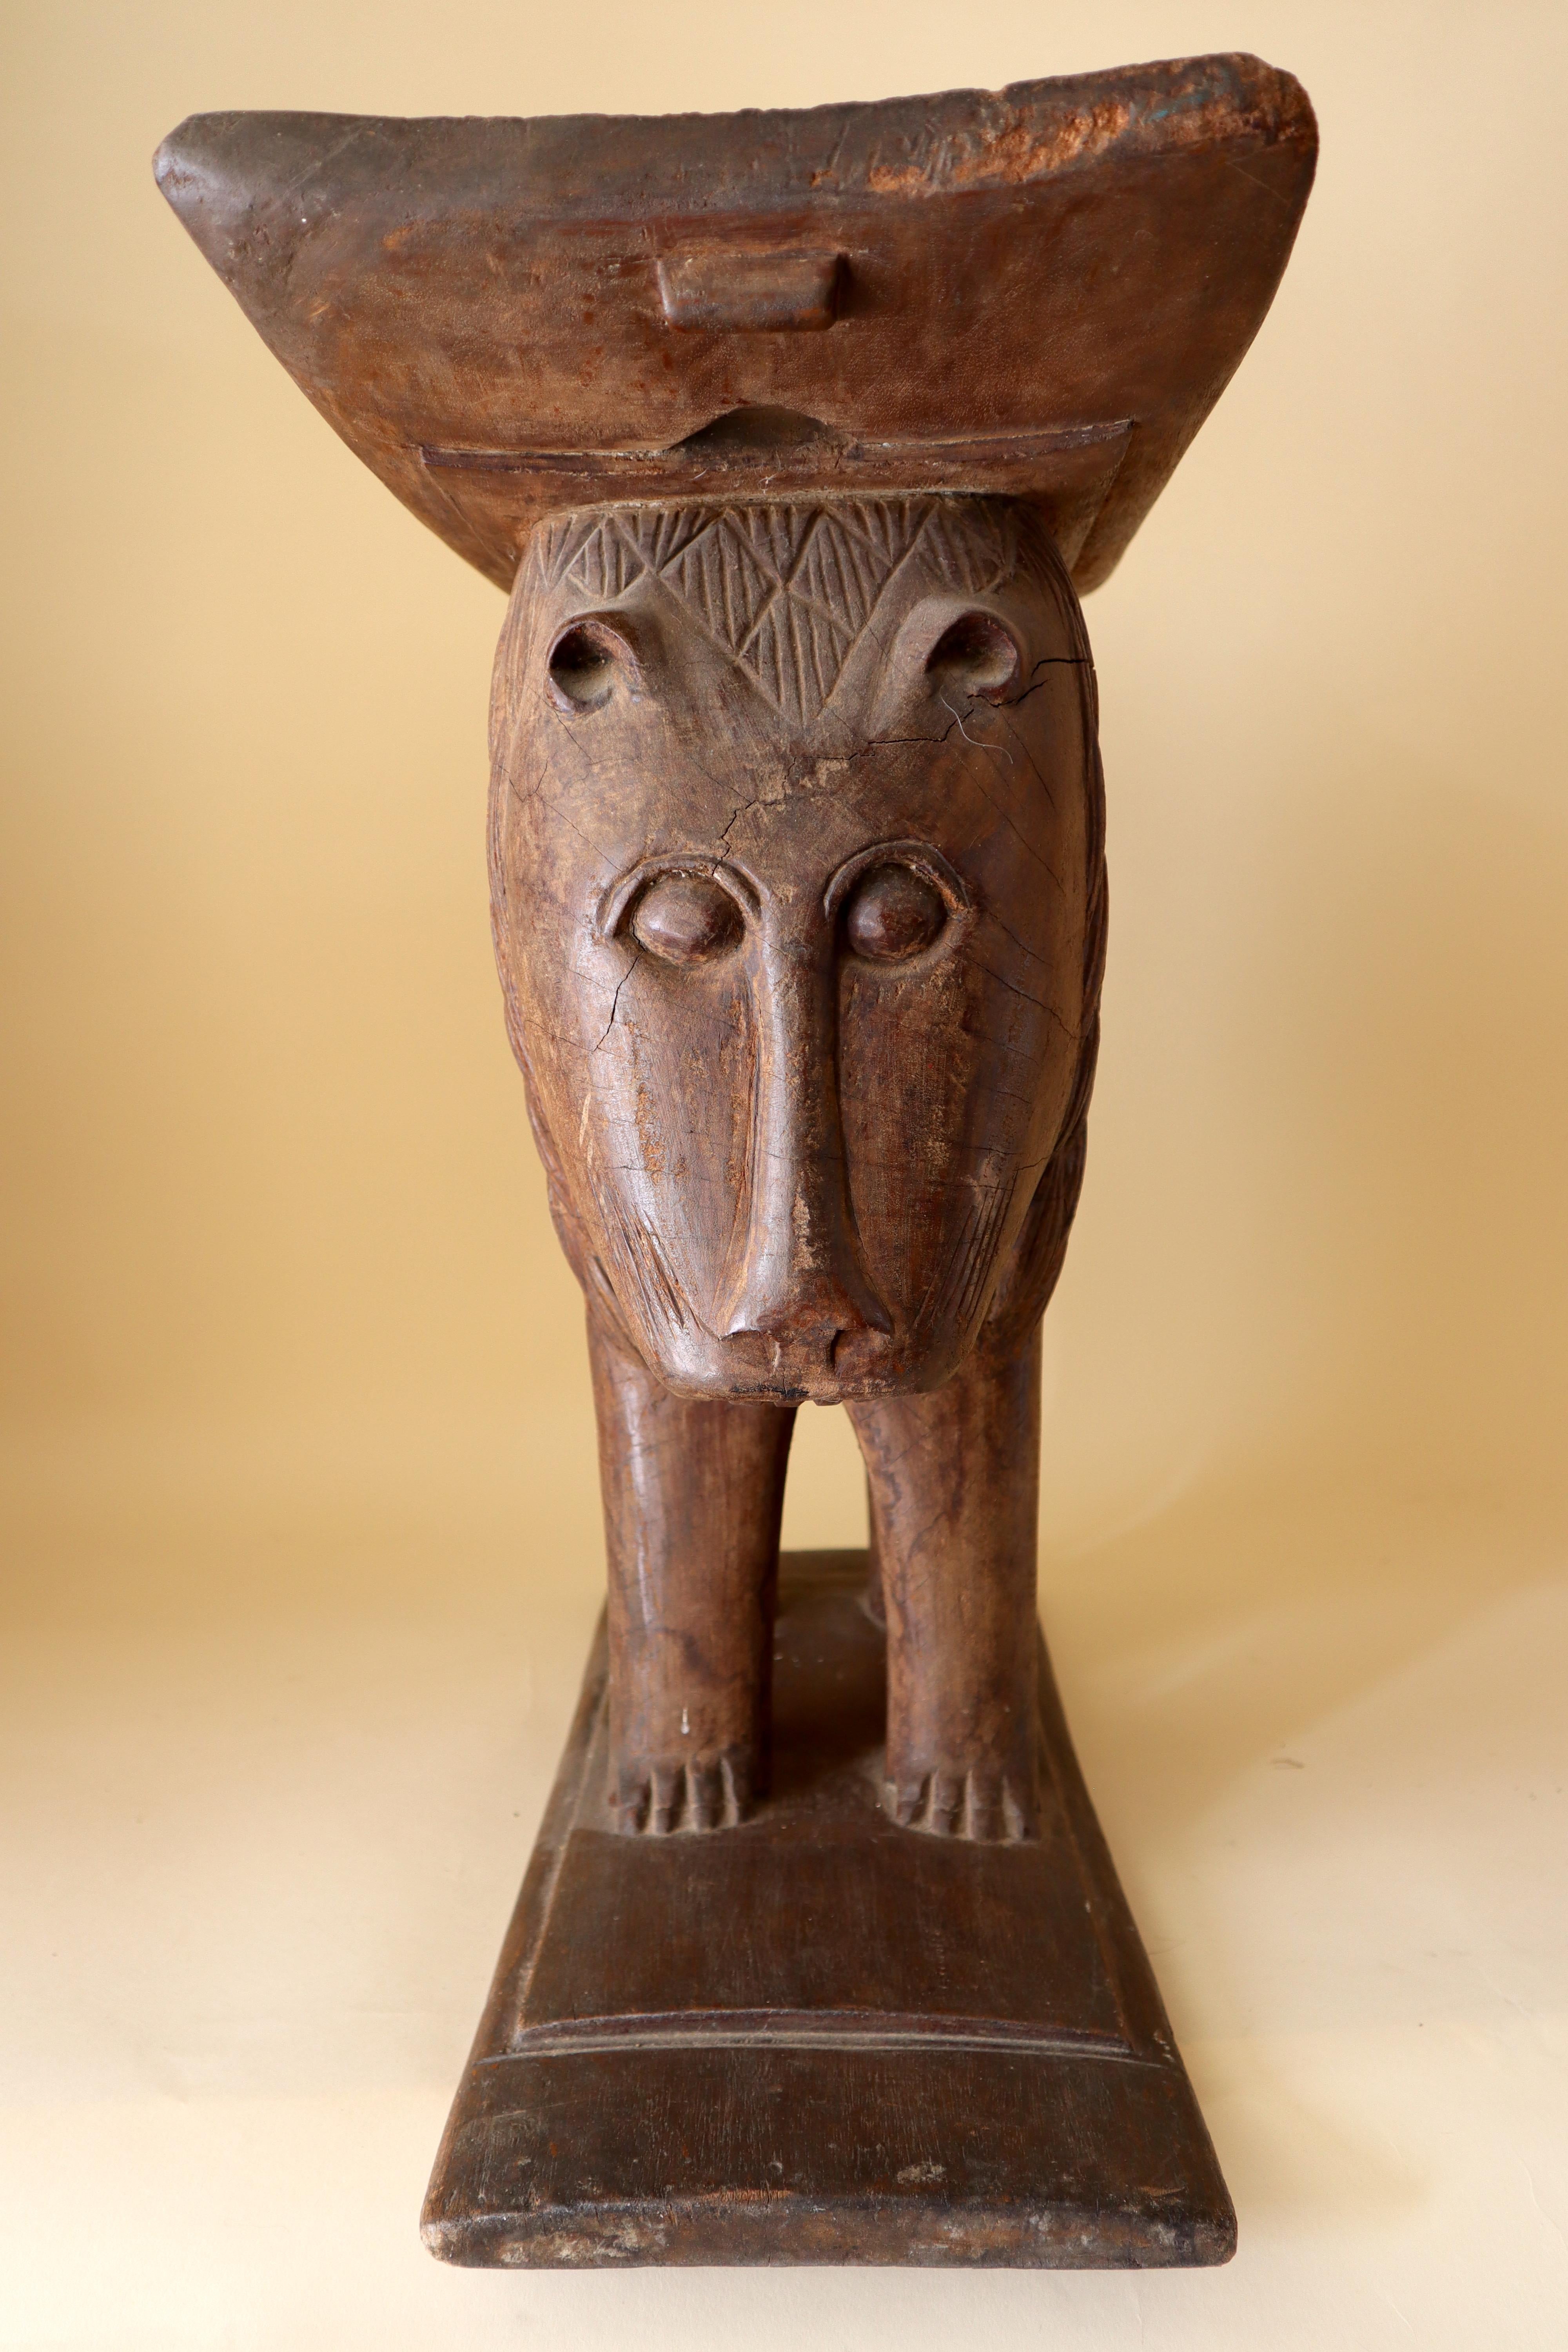 A stately seat or stool for a royal person of the Akan people, Ghana. The Ashanti and Fante People are the primary subgroups of the Akan in Ghana. Created in the early to middle part of the 20th century. Wood with some patina from use.
Stools or